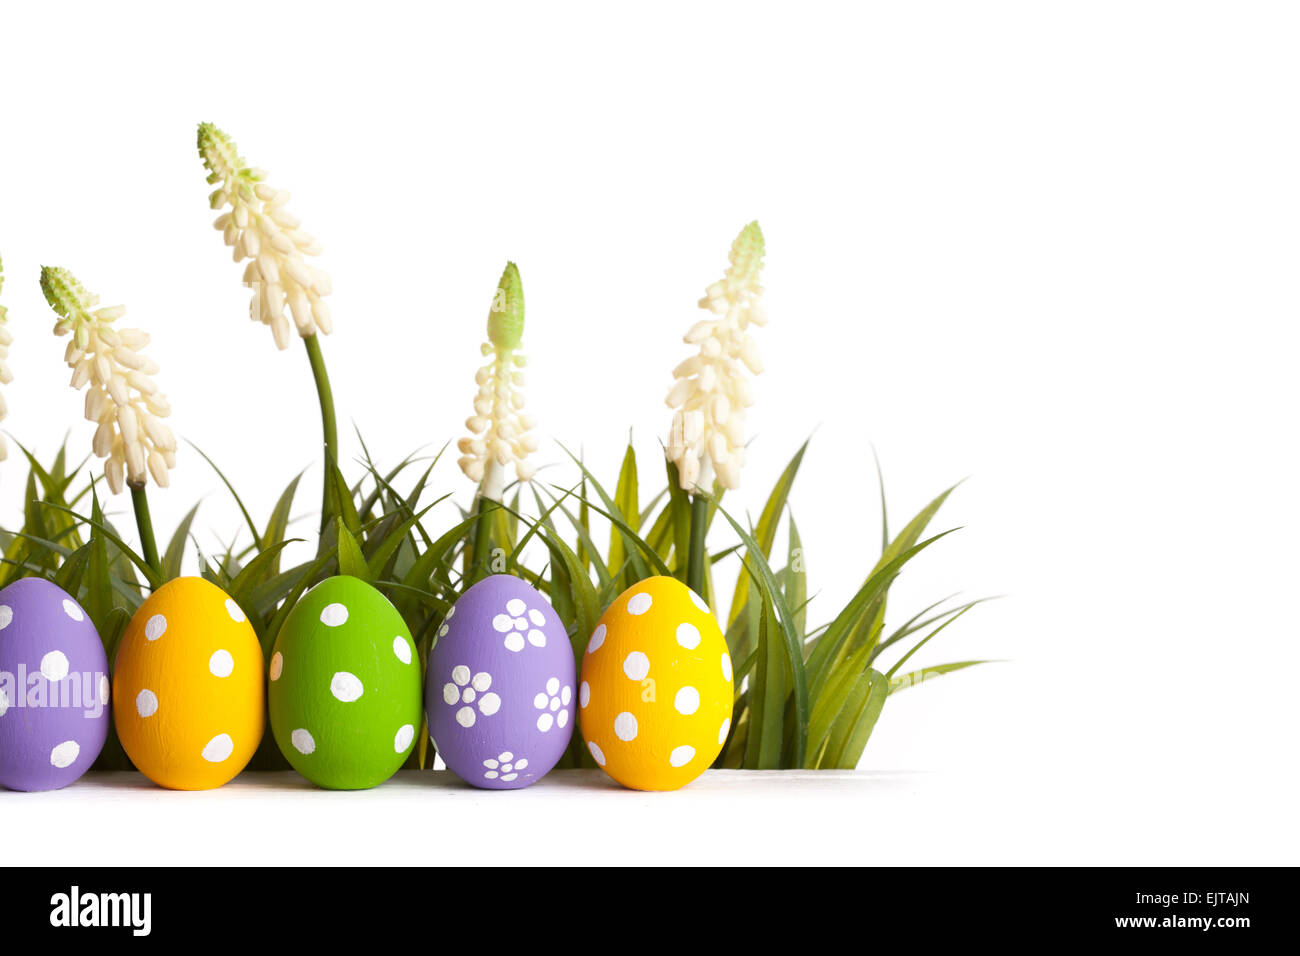 Easter Eggs with flower on Fresh Green Grass Stock Photo